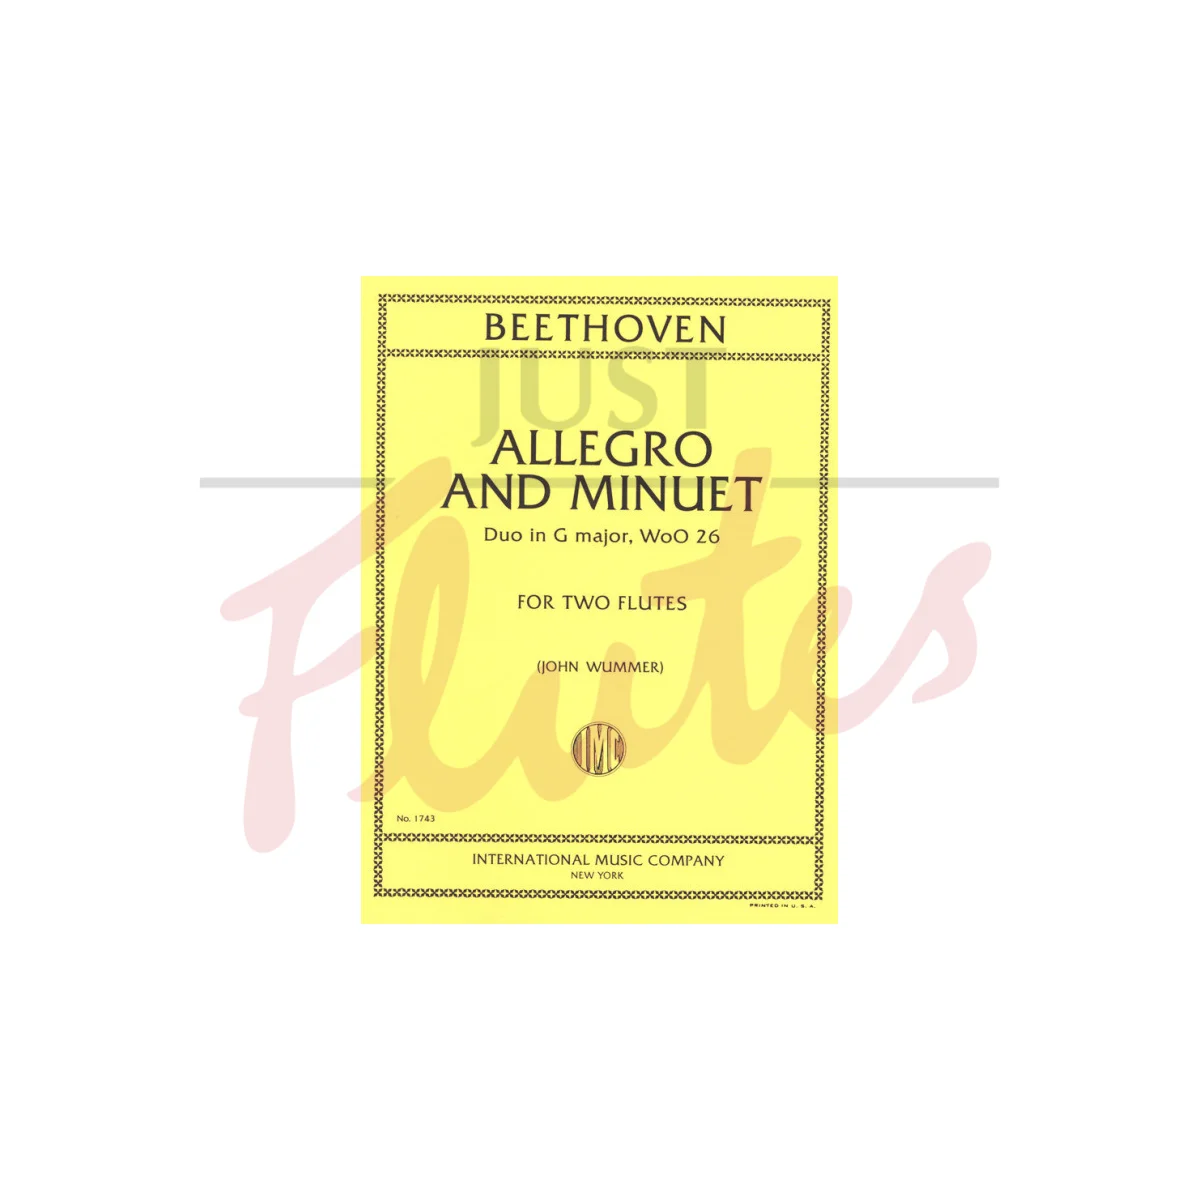 Allegro and Minuet: Duo in G major for Two Flutes